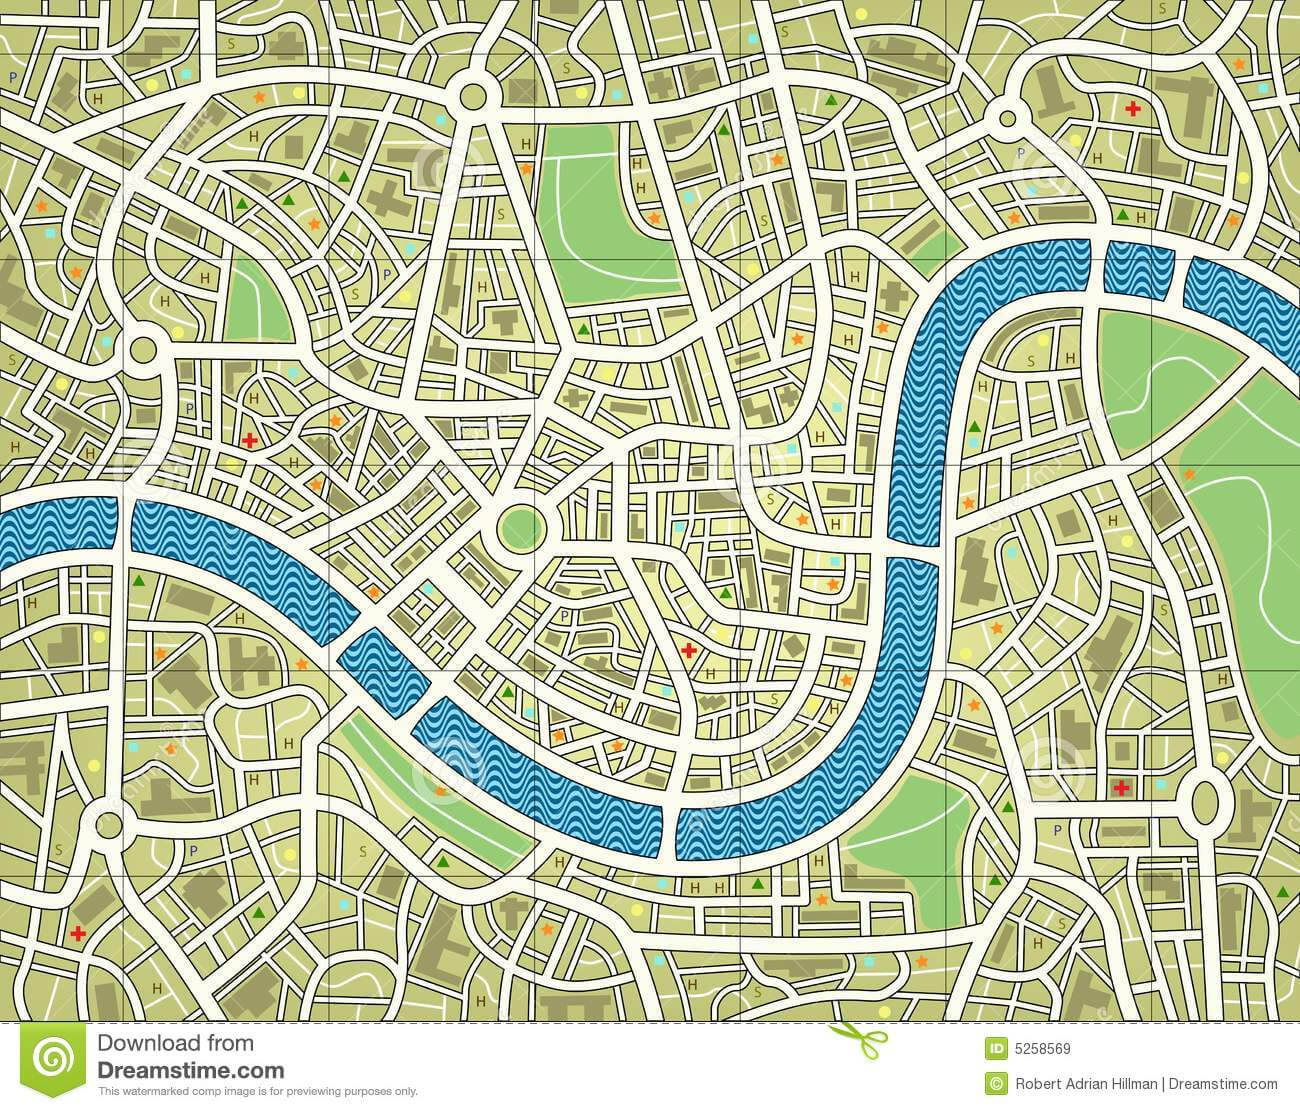 nameless-city-map-stock-vector-illustration-of-survey-5258569-within